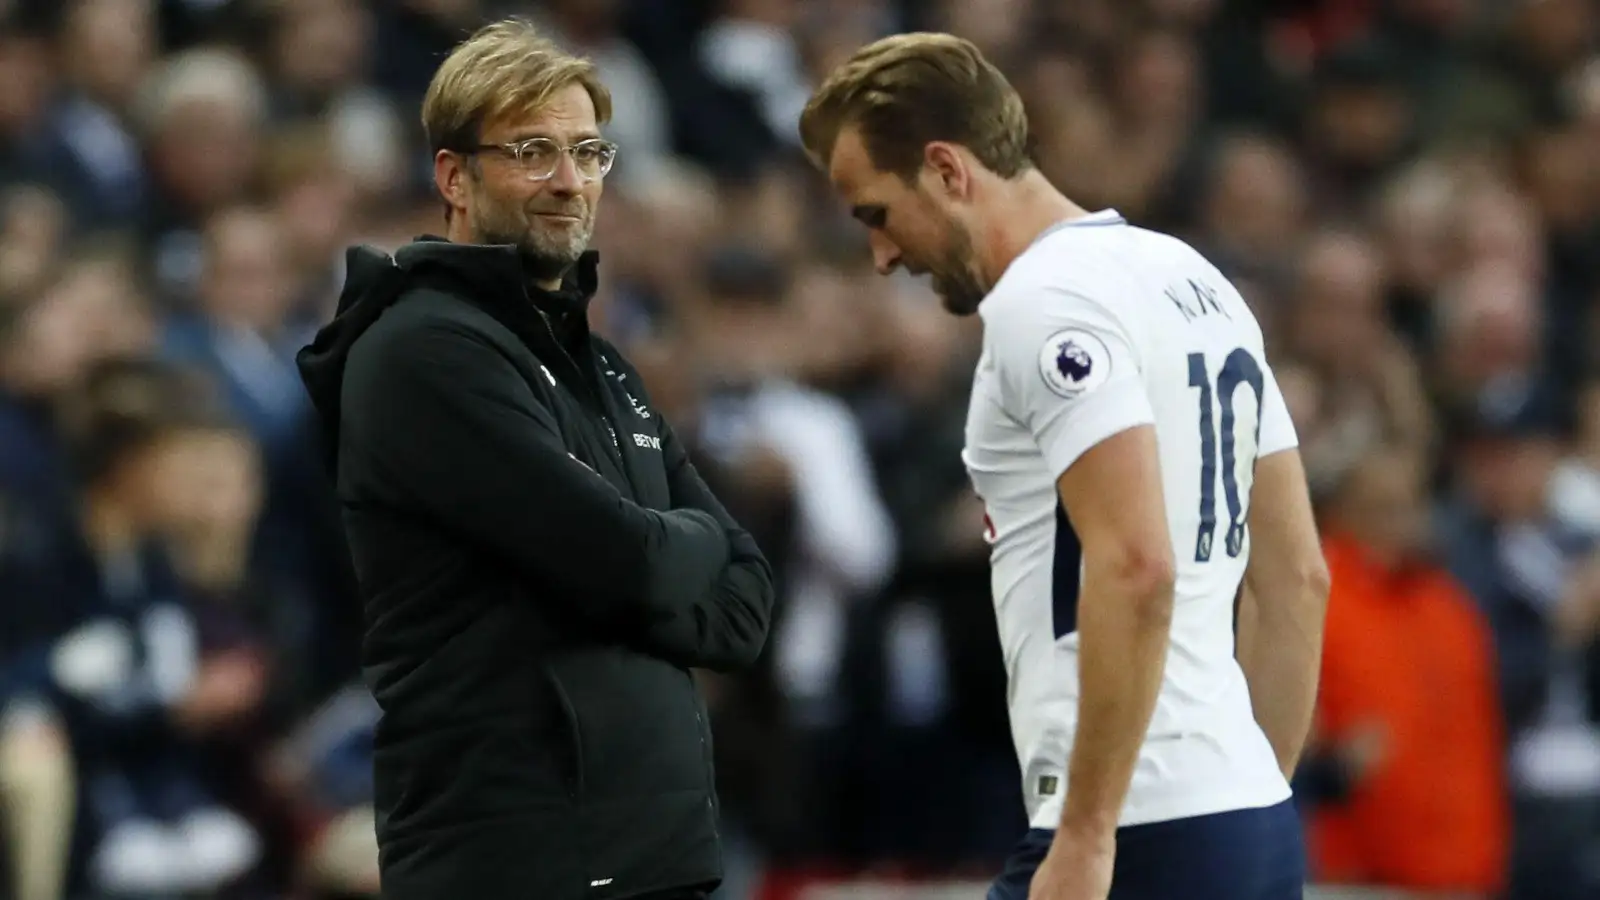 Jurgen Klopp watches Harry Kane leave the pitch during a Liverpool clash with Tottenham in 2017.